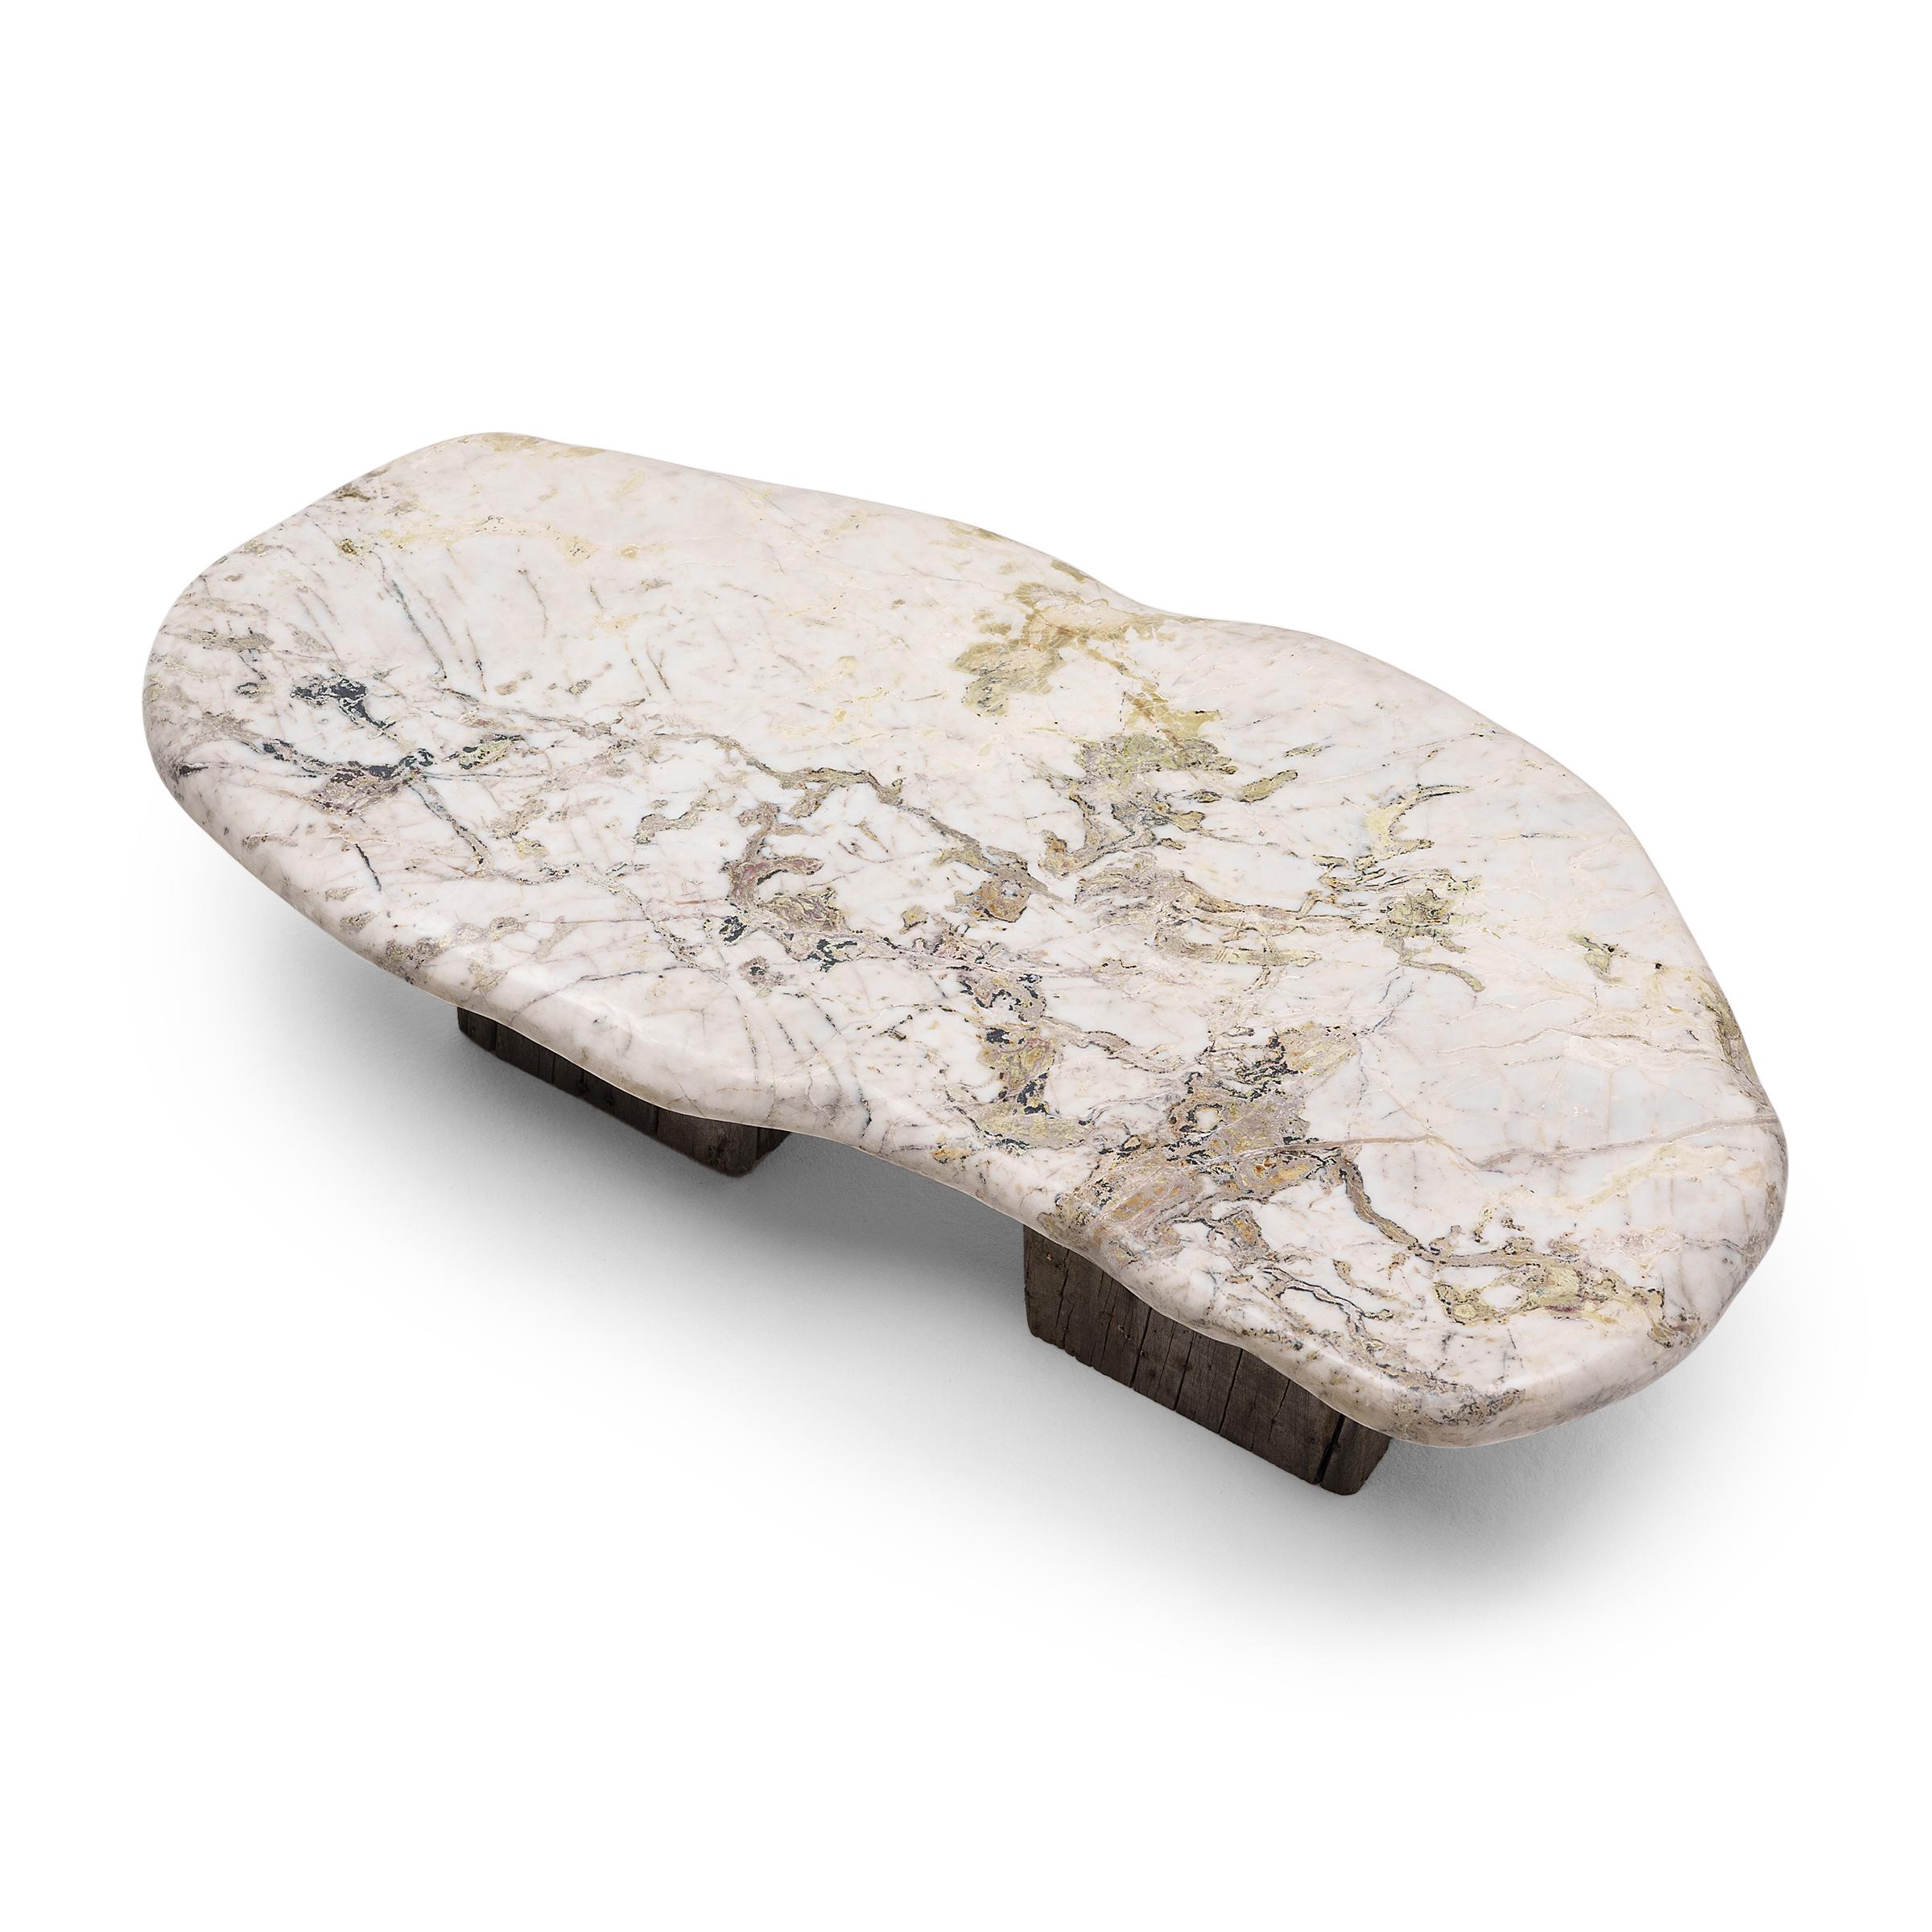 Chinese Glacial Meditation Stone Table In Good Condition For Sale In Chicago, IL